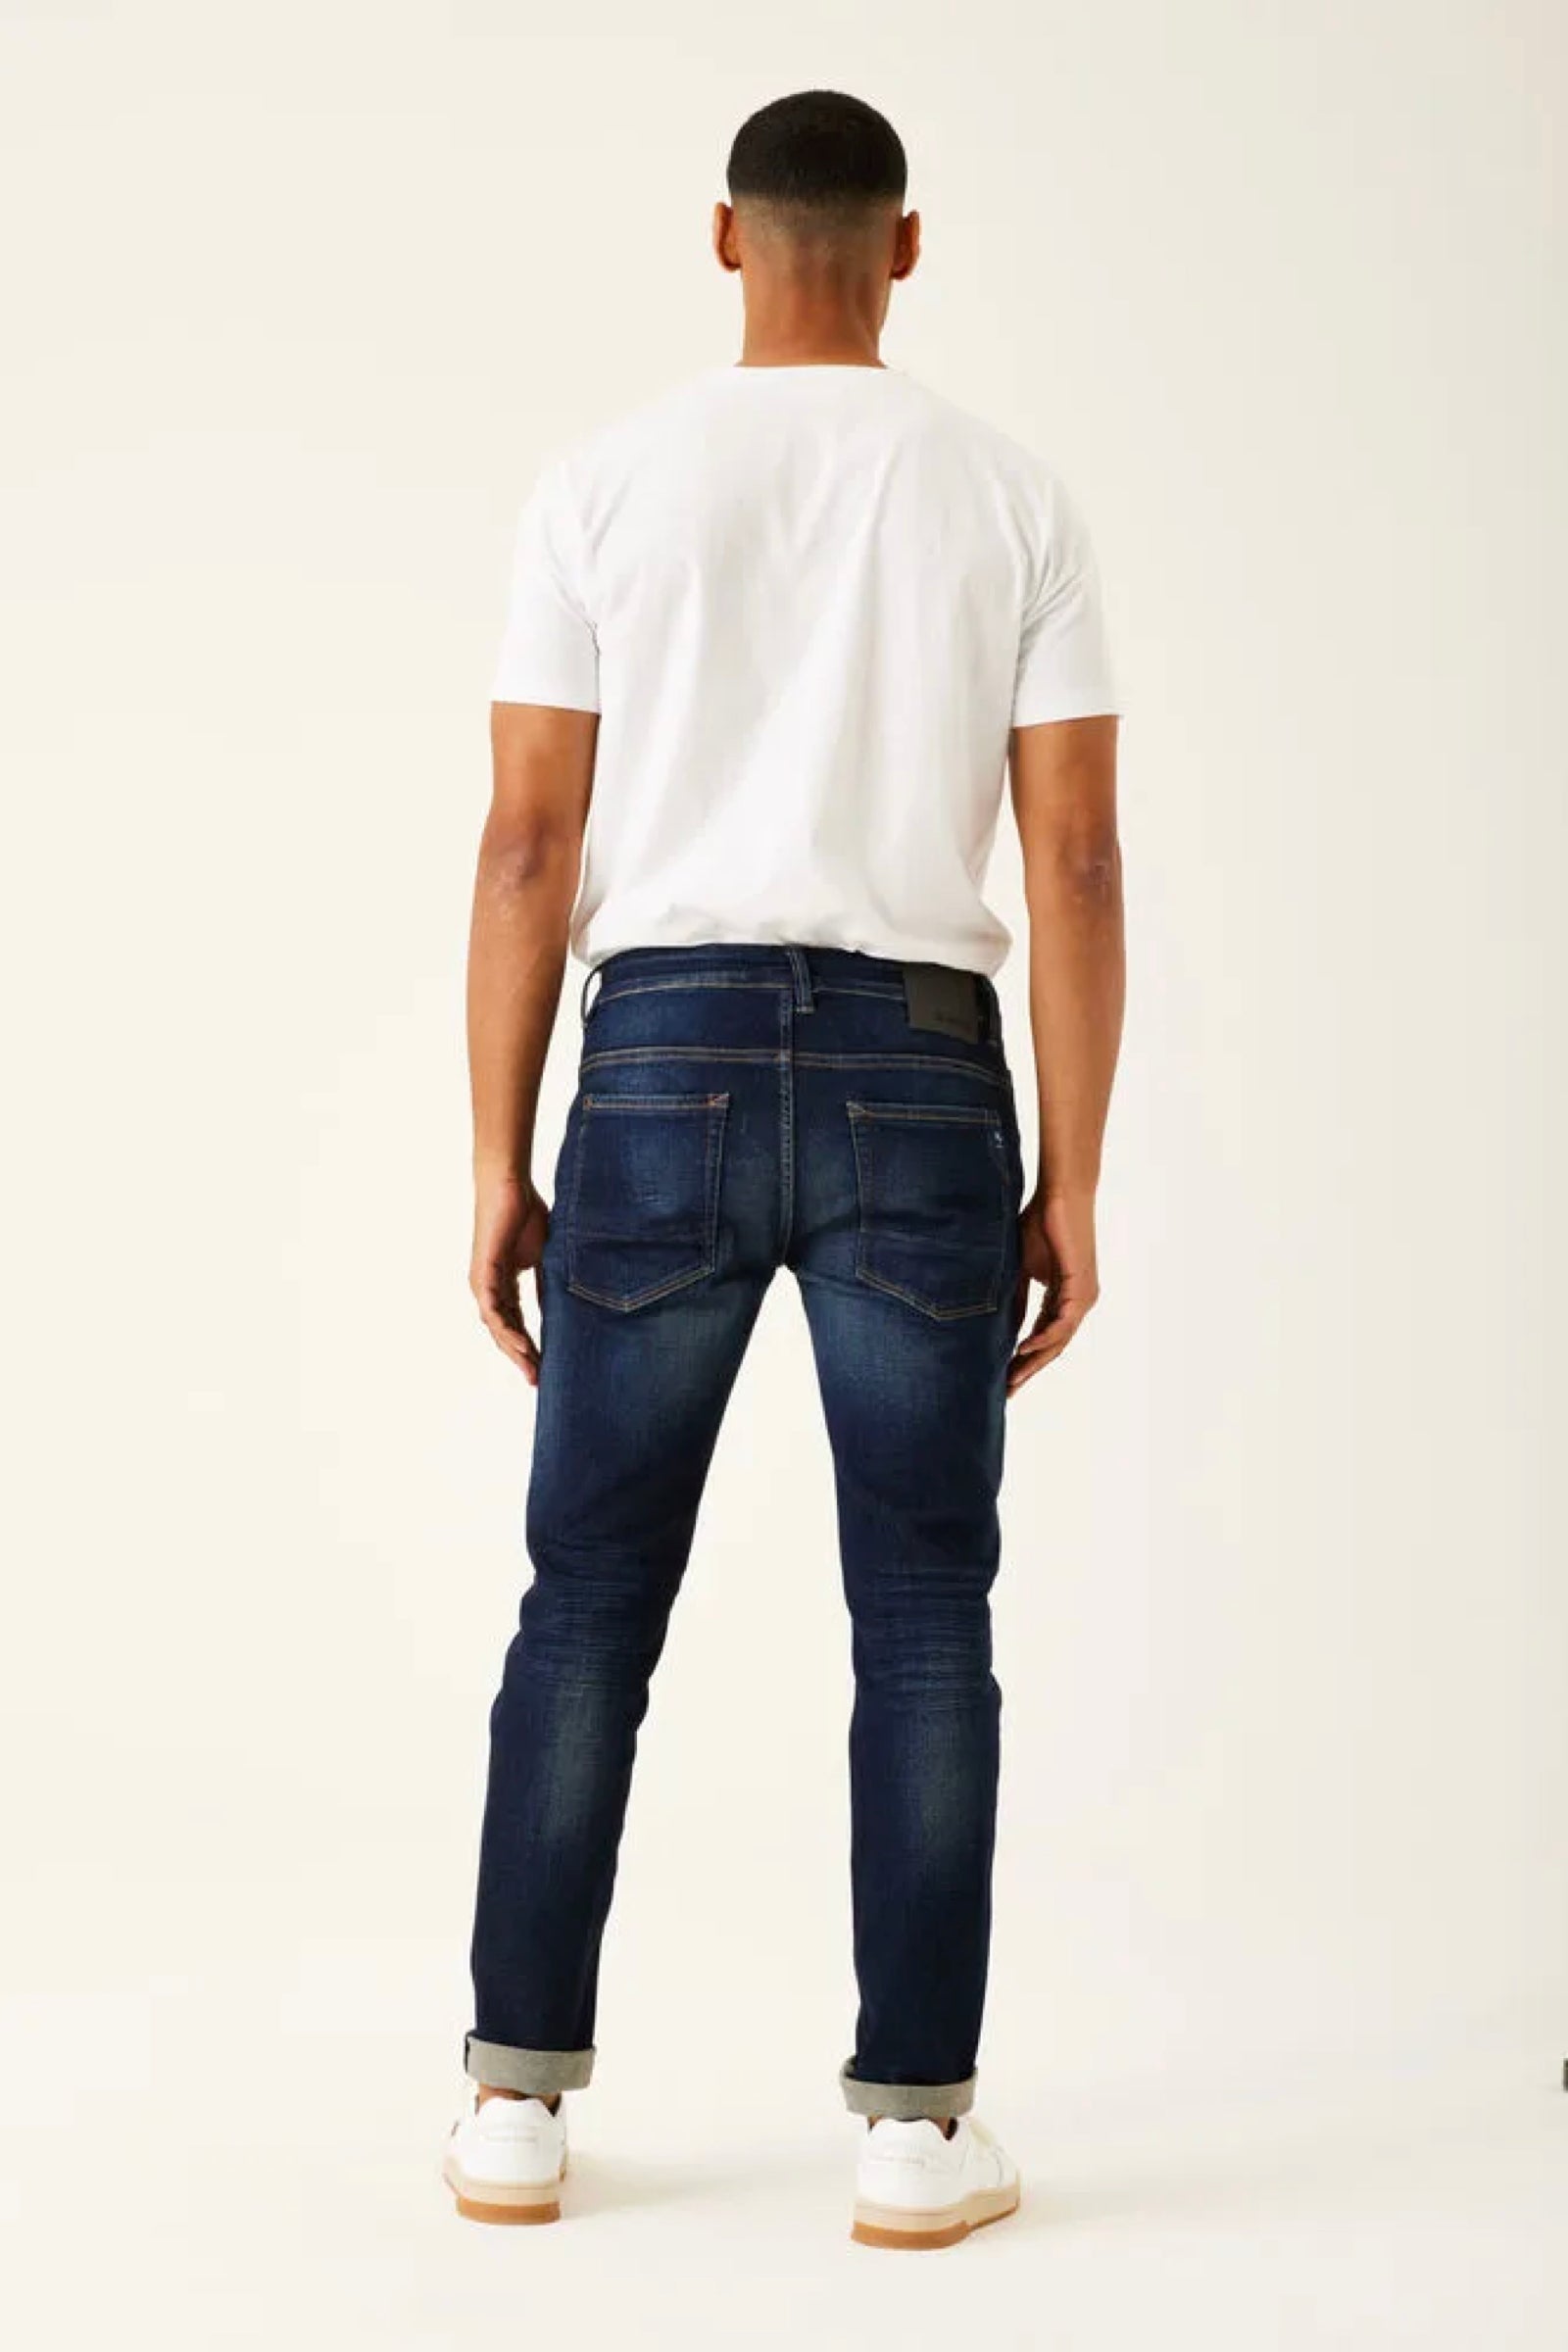 RUSSO 611 TAPERED JEAN - DARK USED